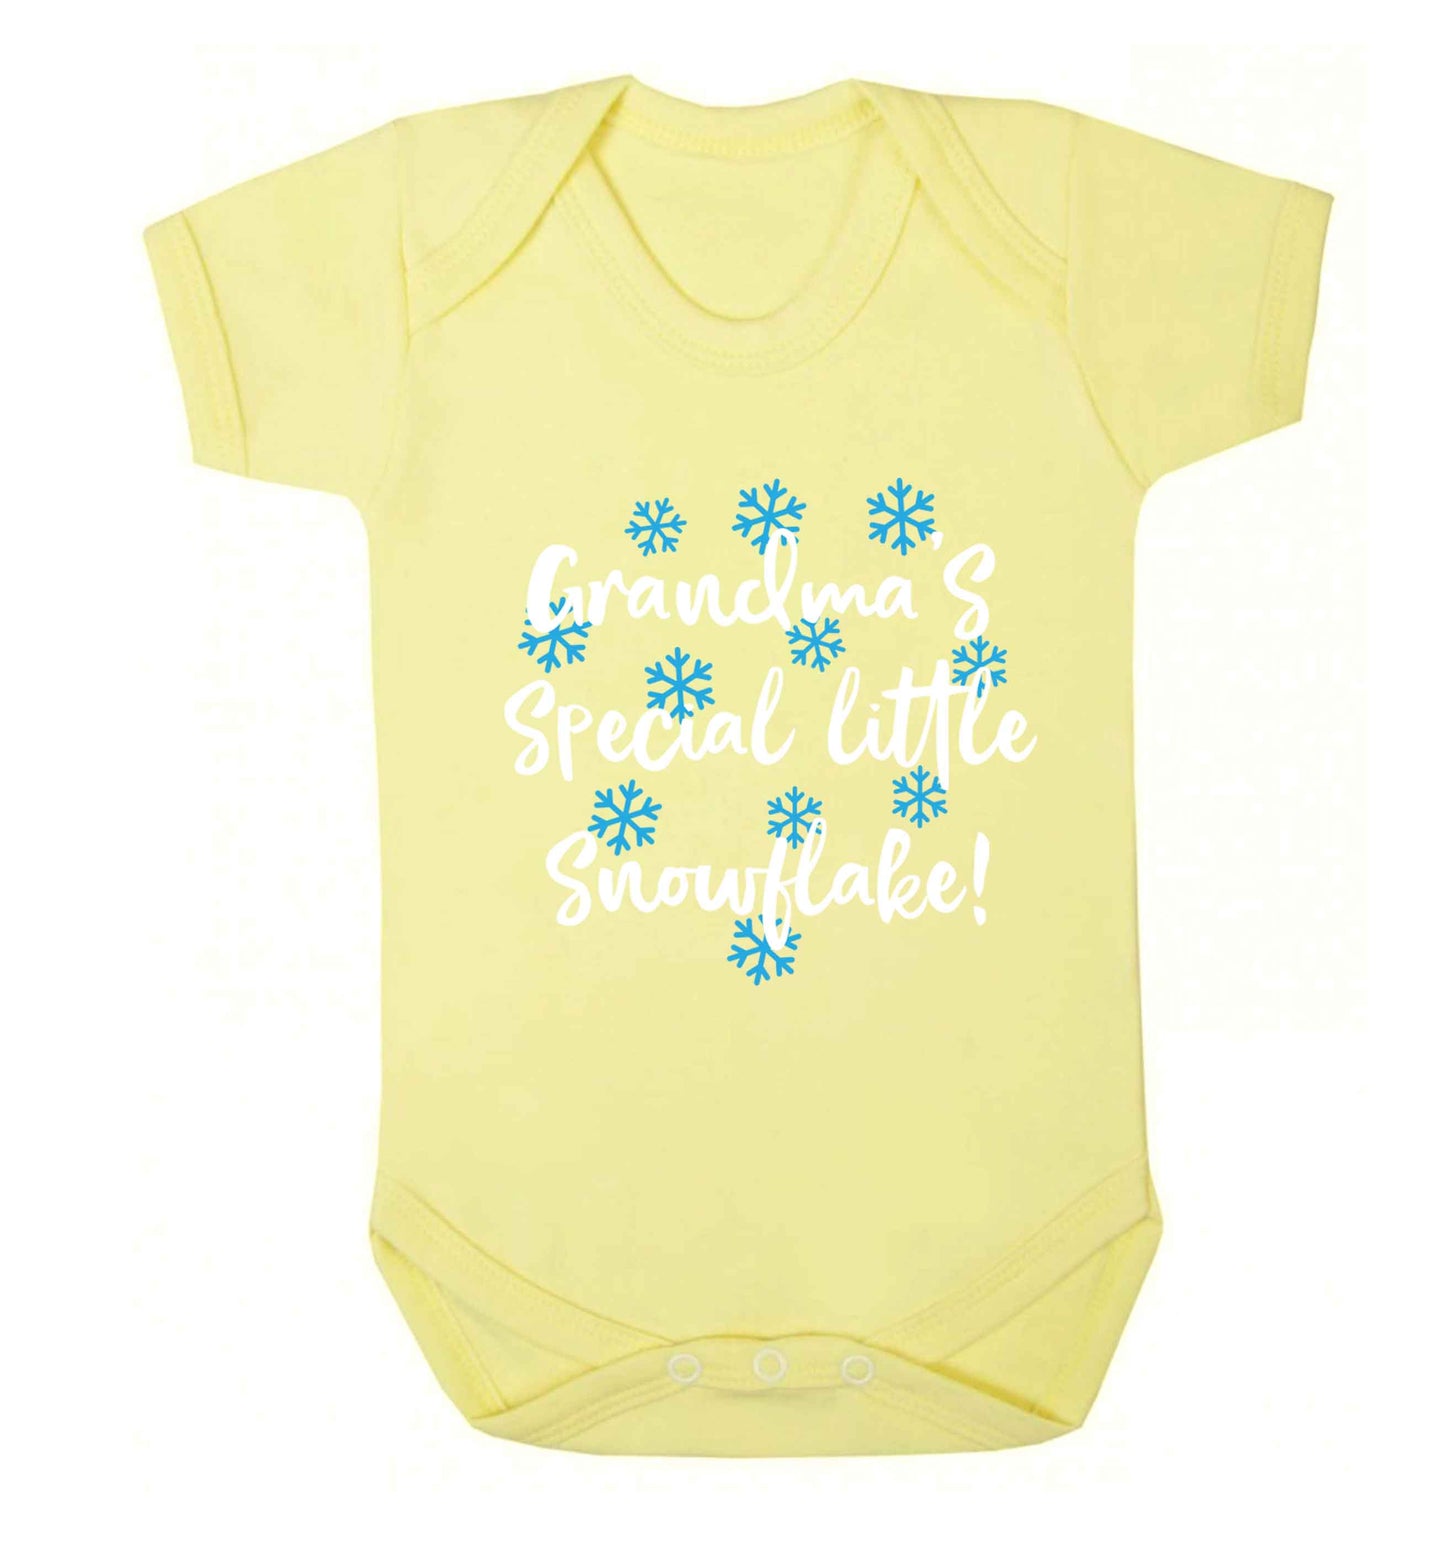 Grandma's special little snowflake Baby Vest pale yellow 18-24 months